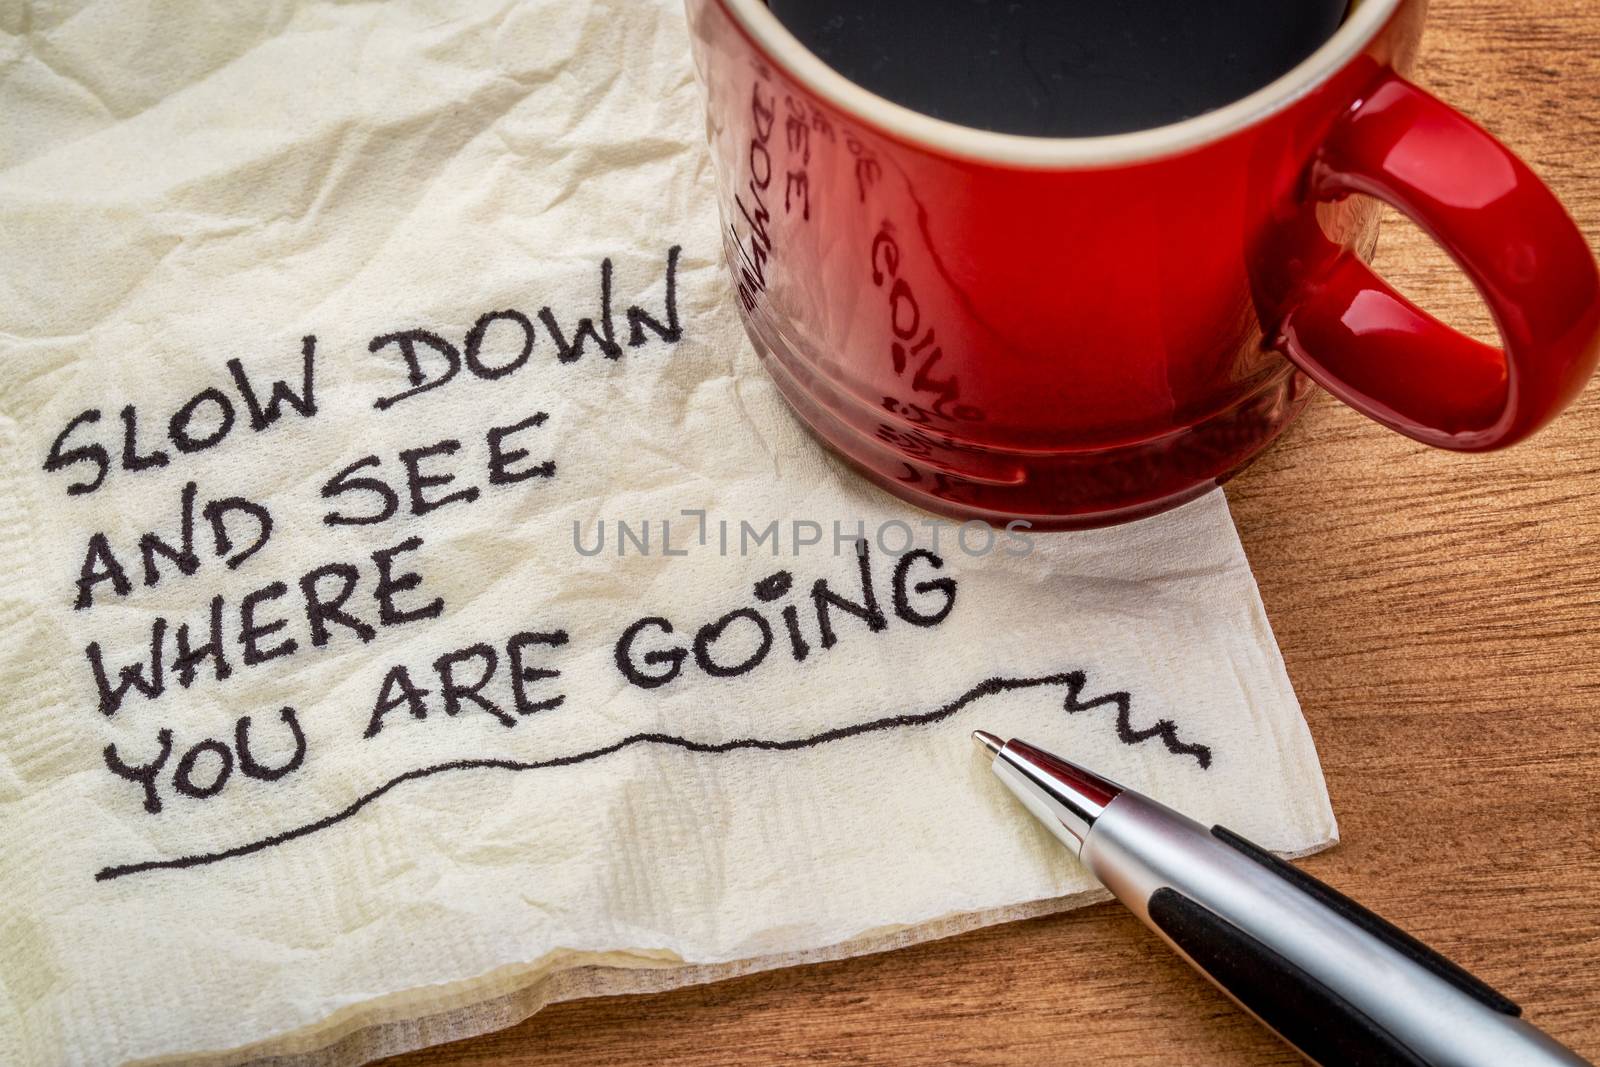 slow down and see on napkin by PixelsAway